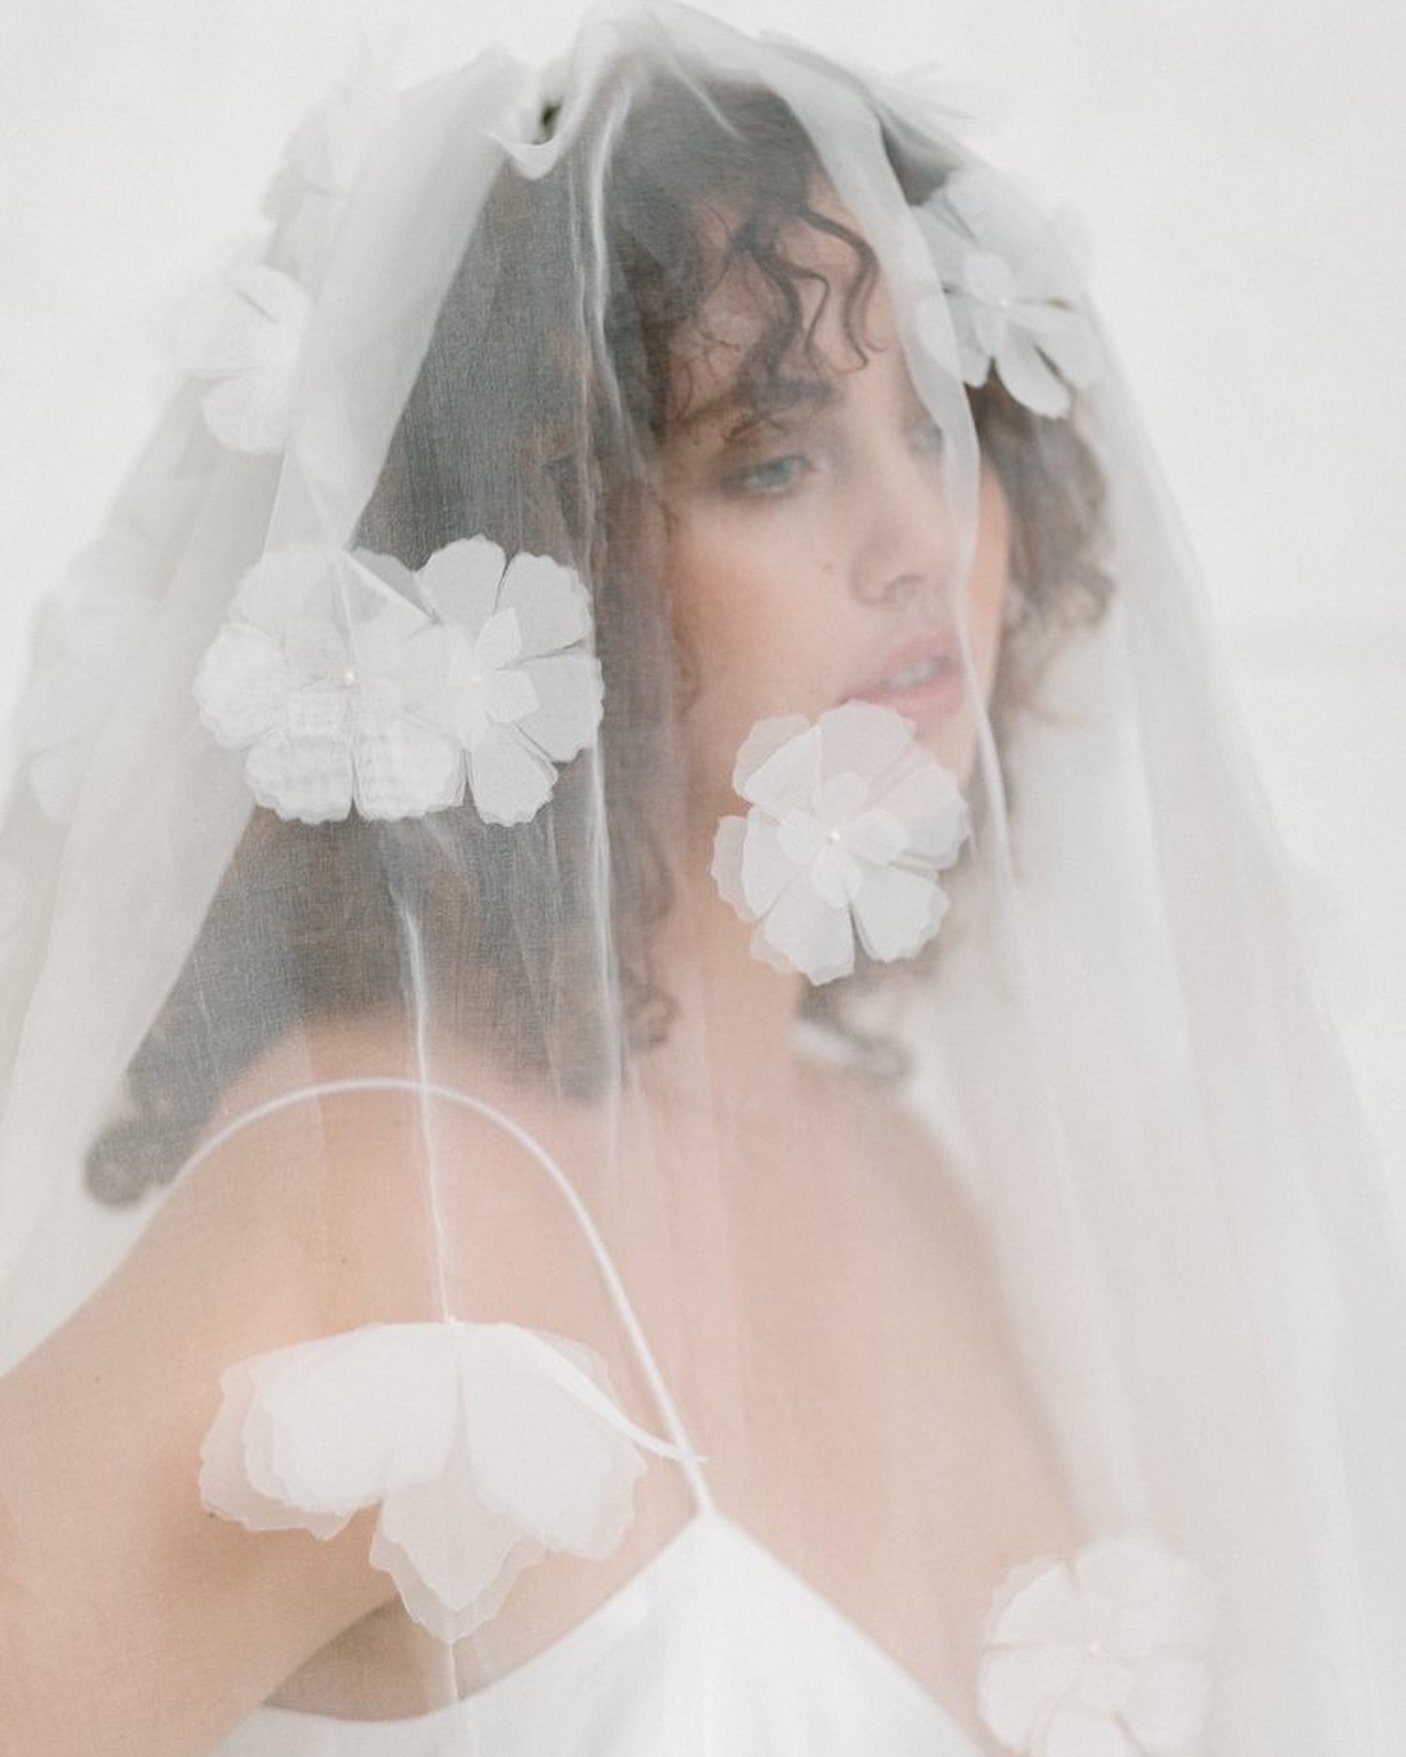 The Emma veil is a real statement piece. Silk organza is secured via a comb to the top of the head to cocoon the body and gather at the hem. 

Hand made silk organza flowers - all repurposed from off-cuts - are an optional adornment. Wear it ruched o